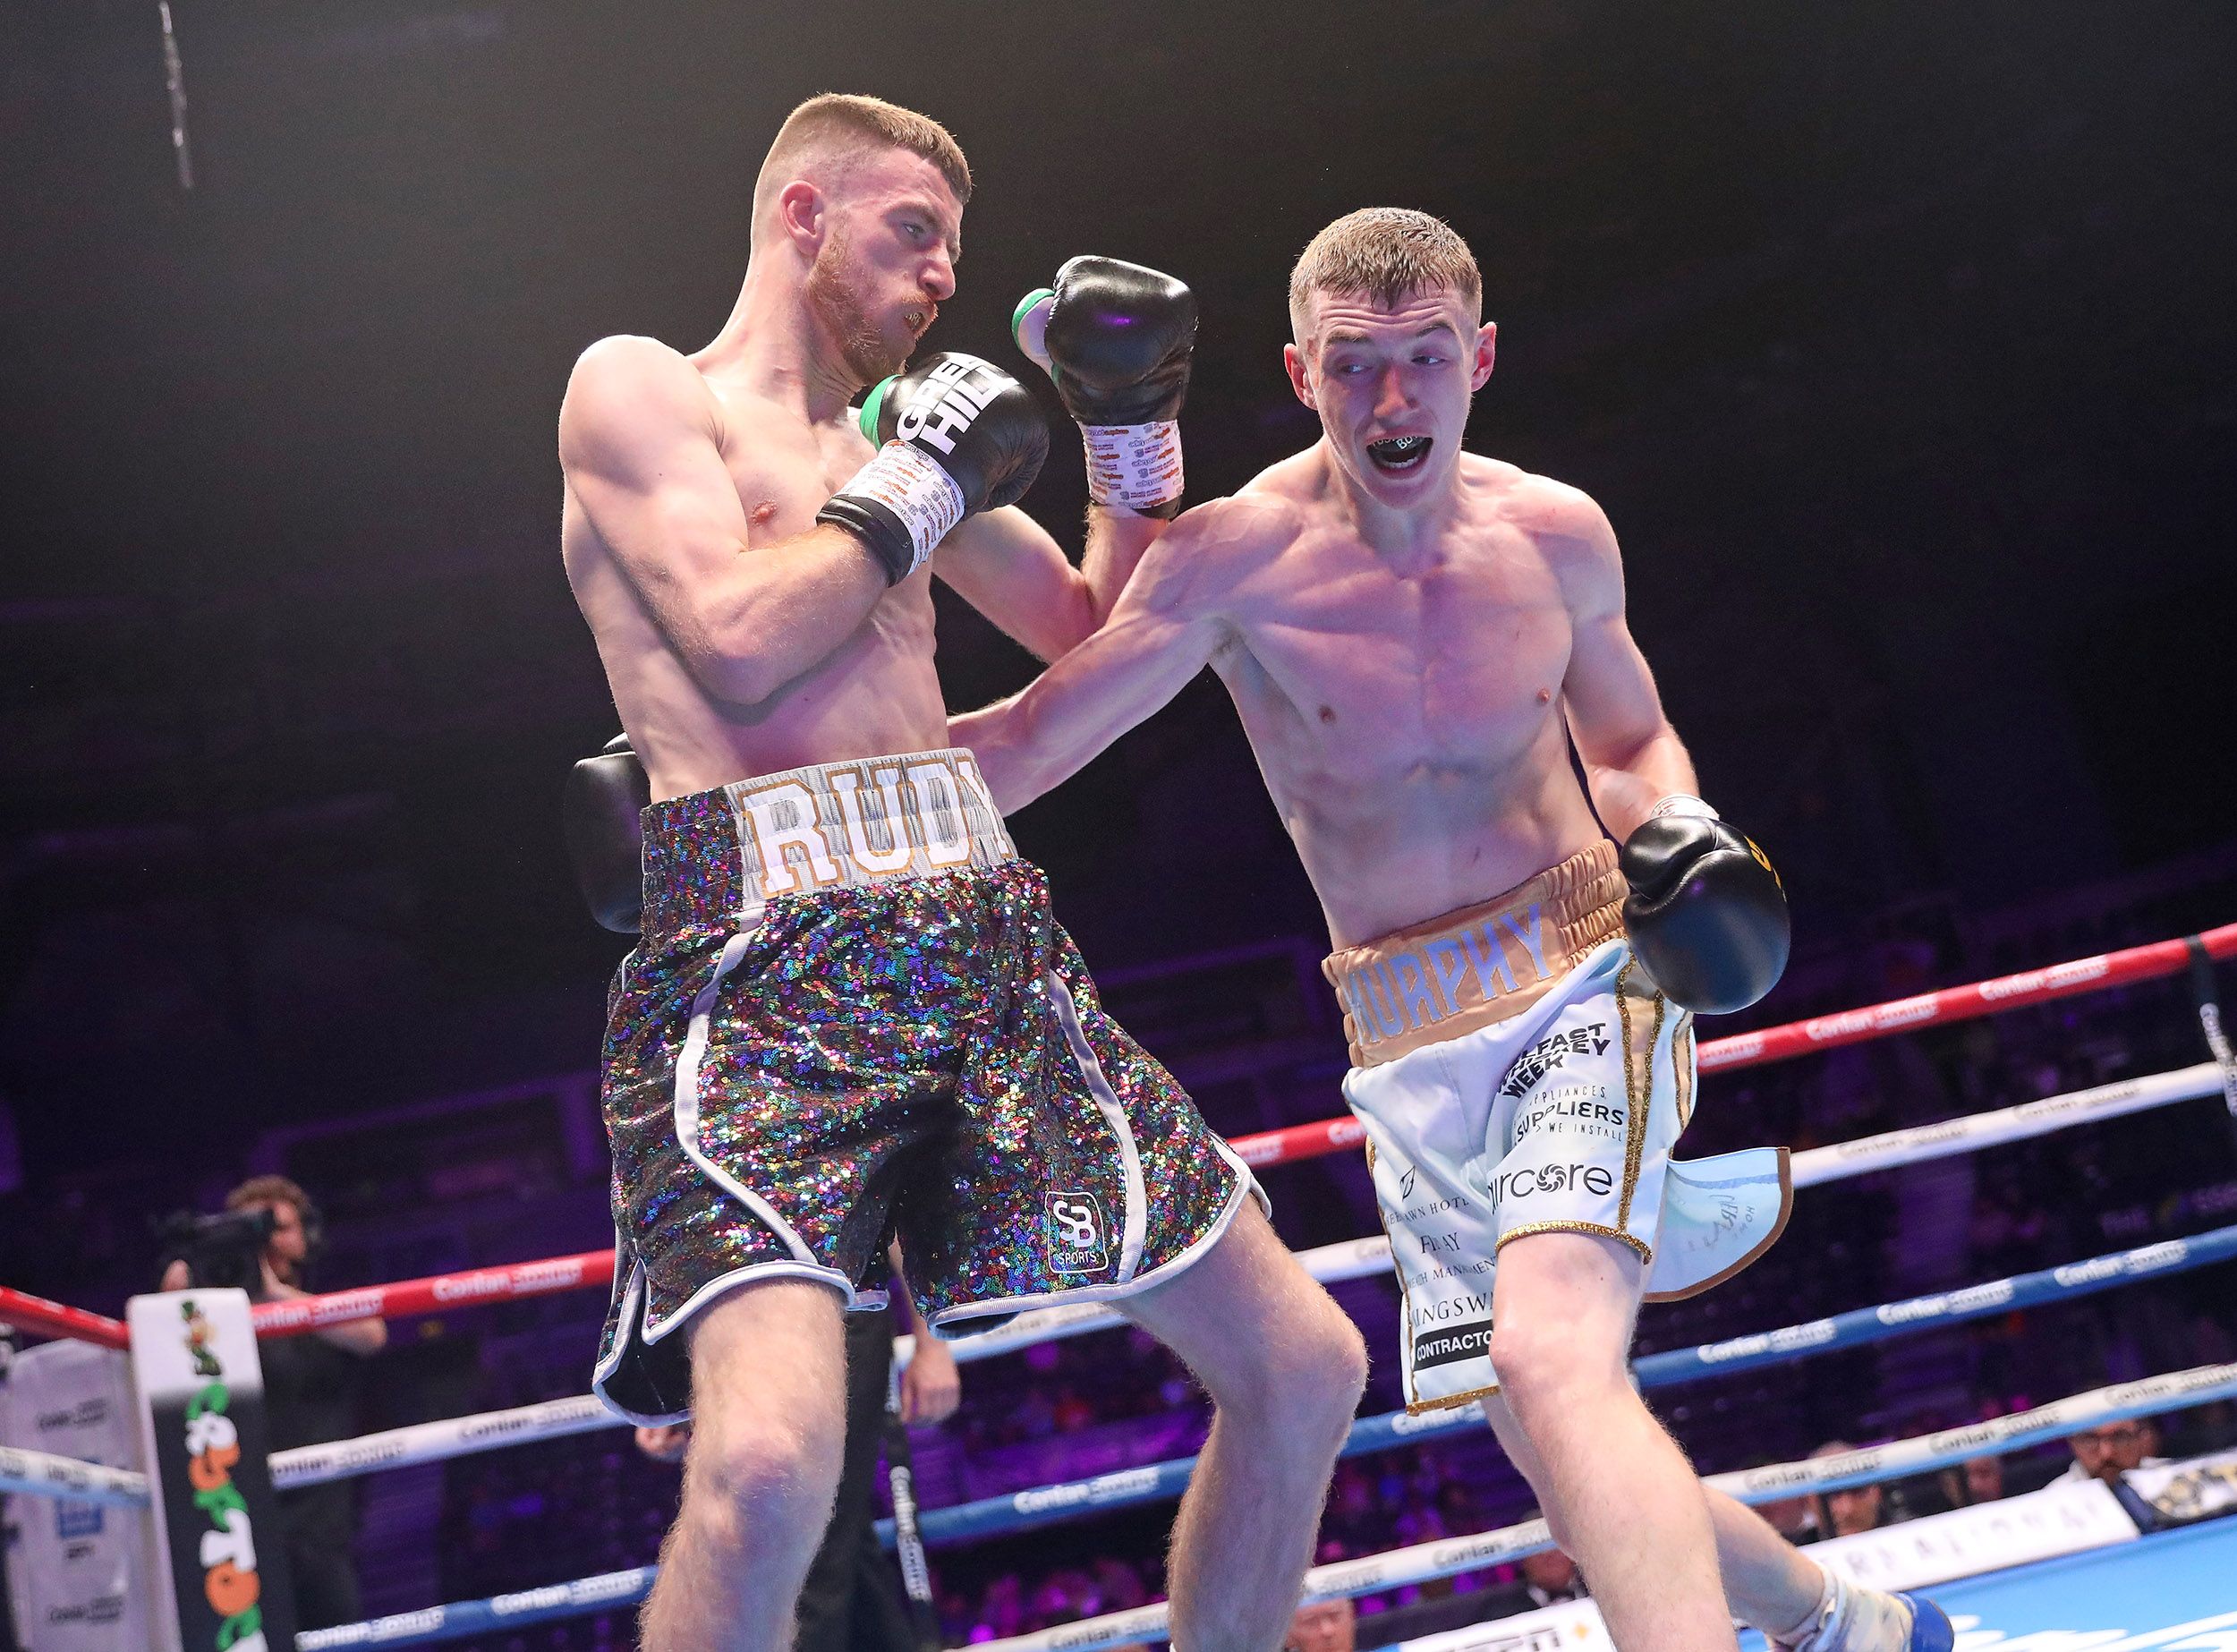 Colm Murphy lands on Ruadhan Farrell 